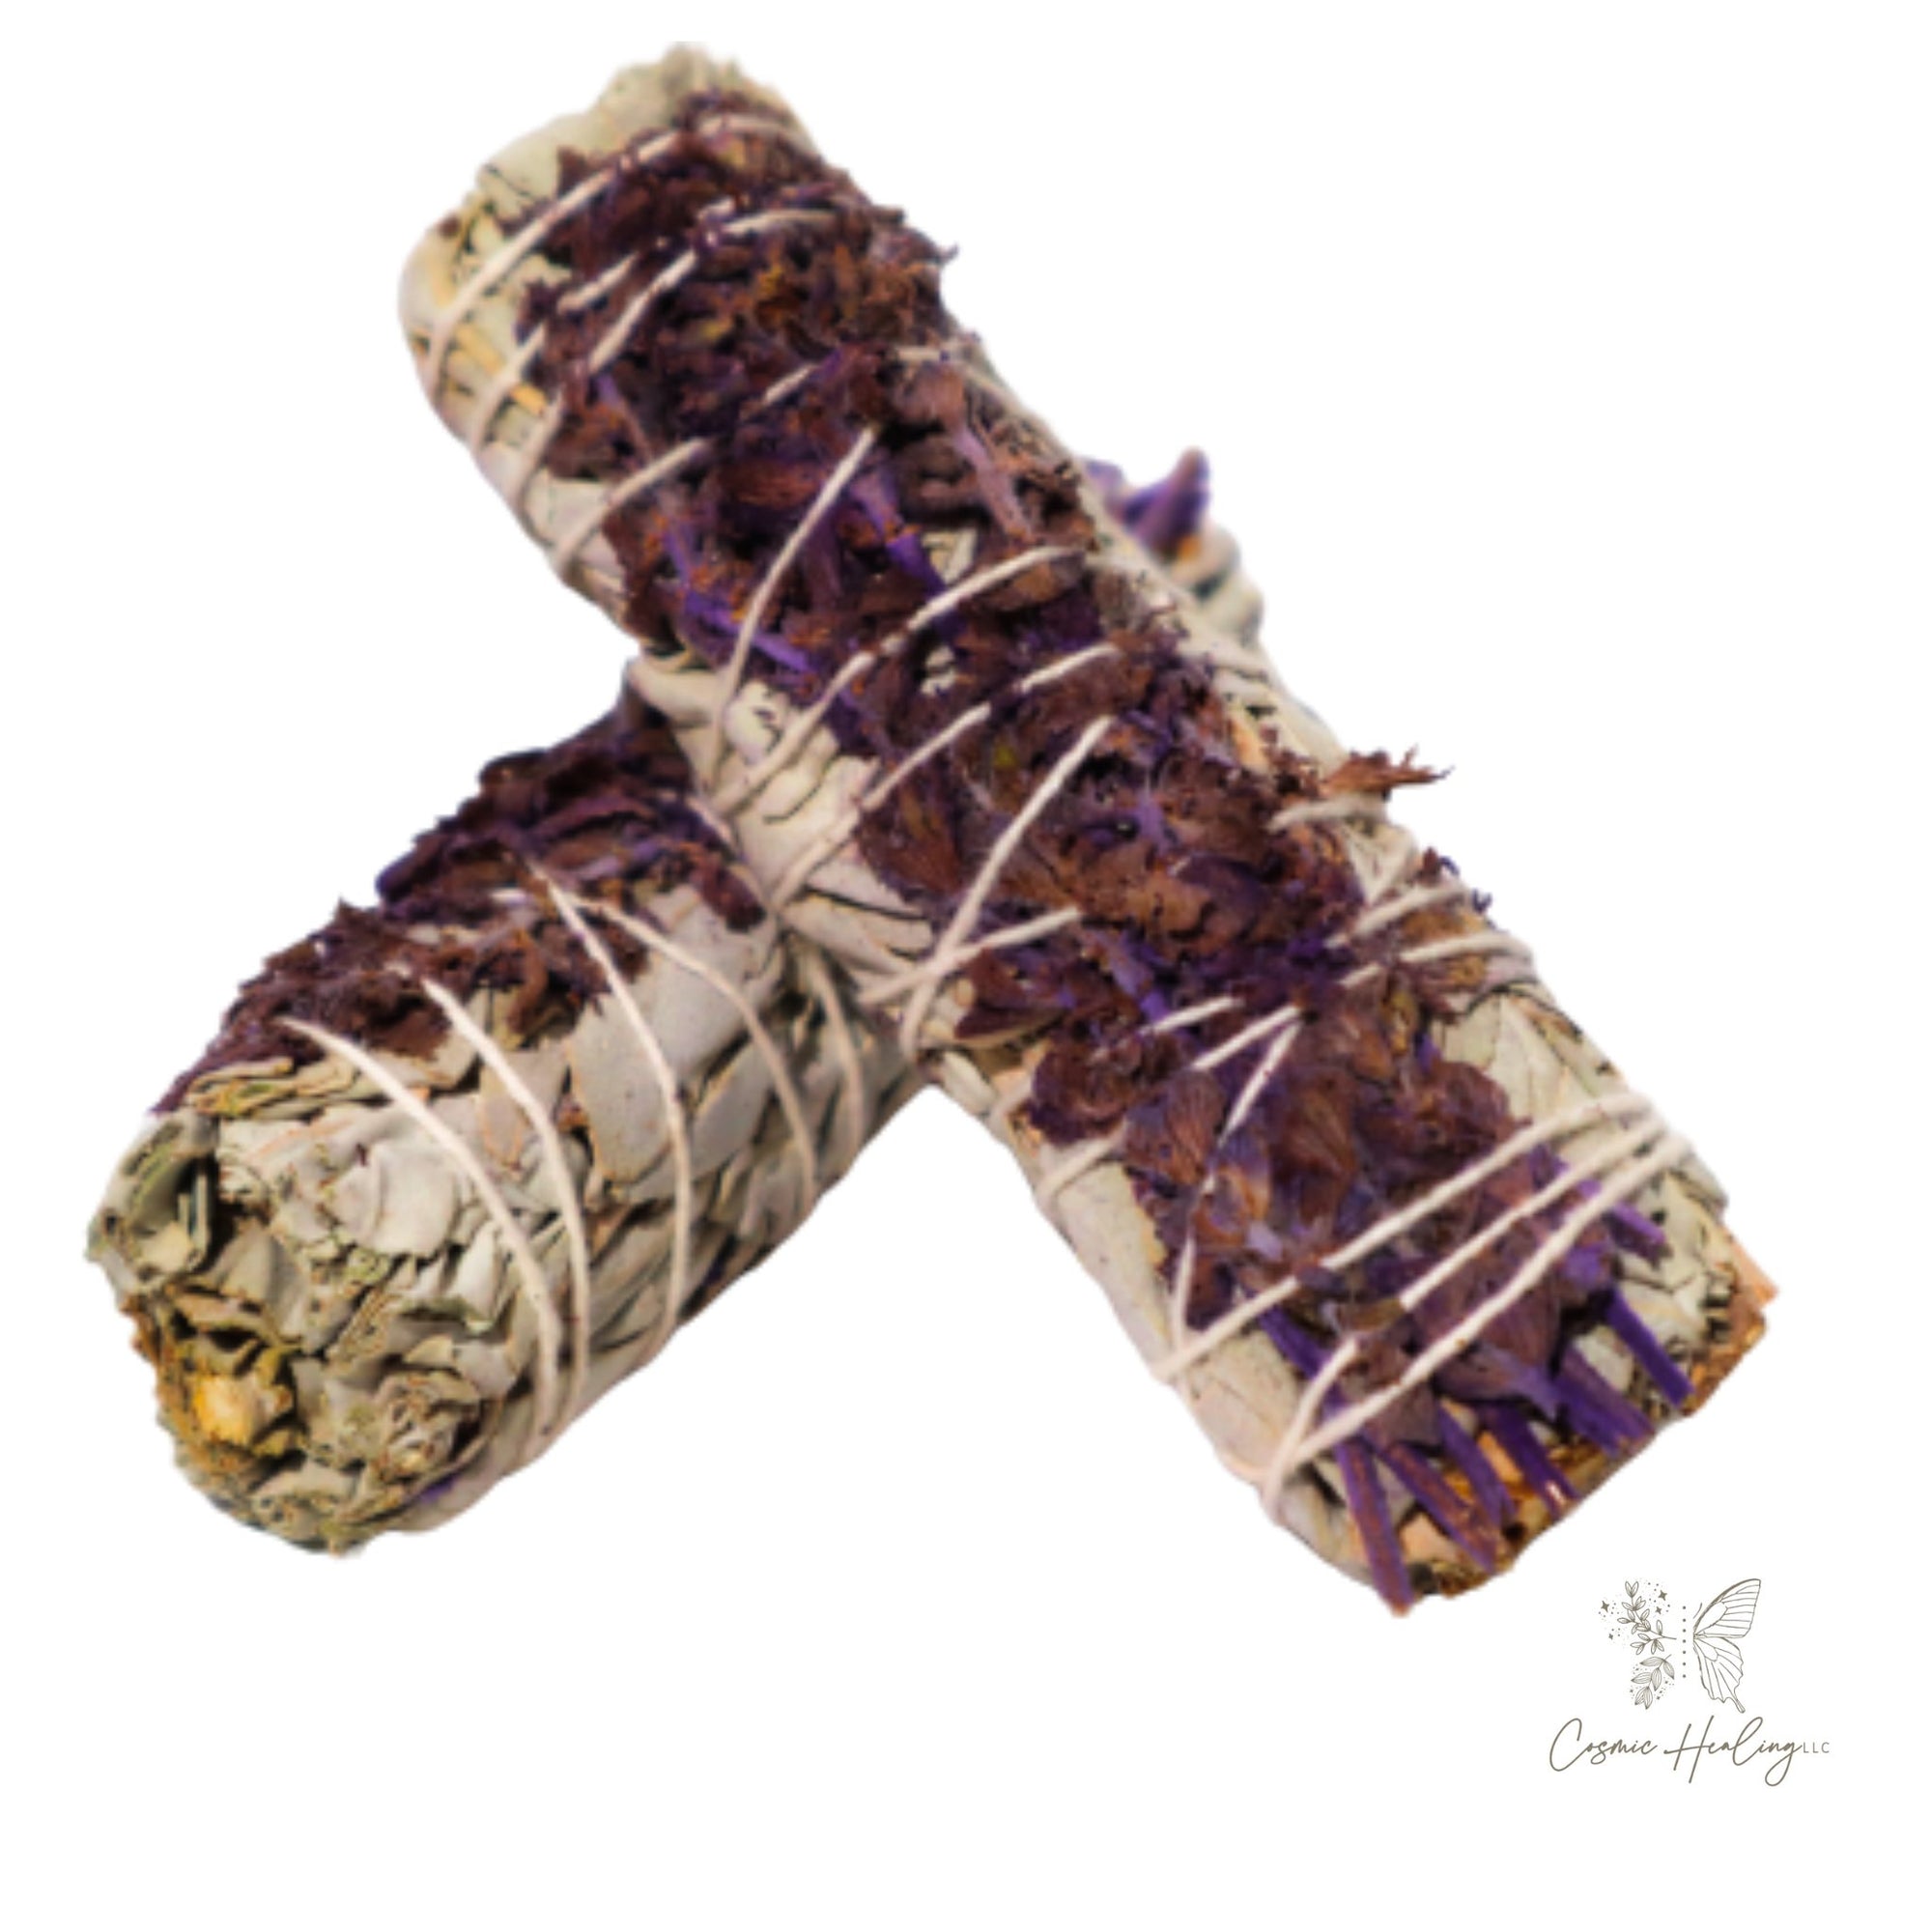 White Sage & Lavender Smudge Stick Bundle 4" for peace and harmony - Shop Cosmic Healing